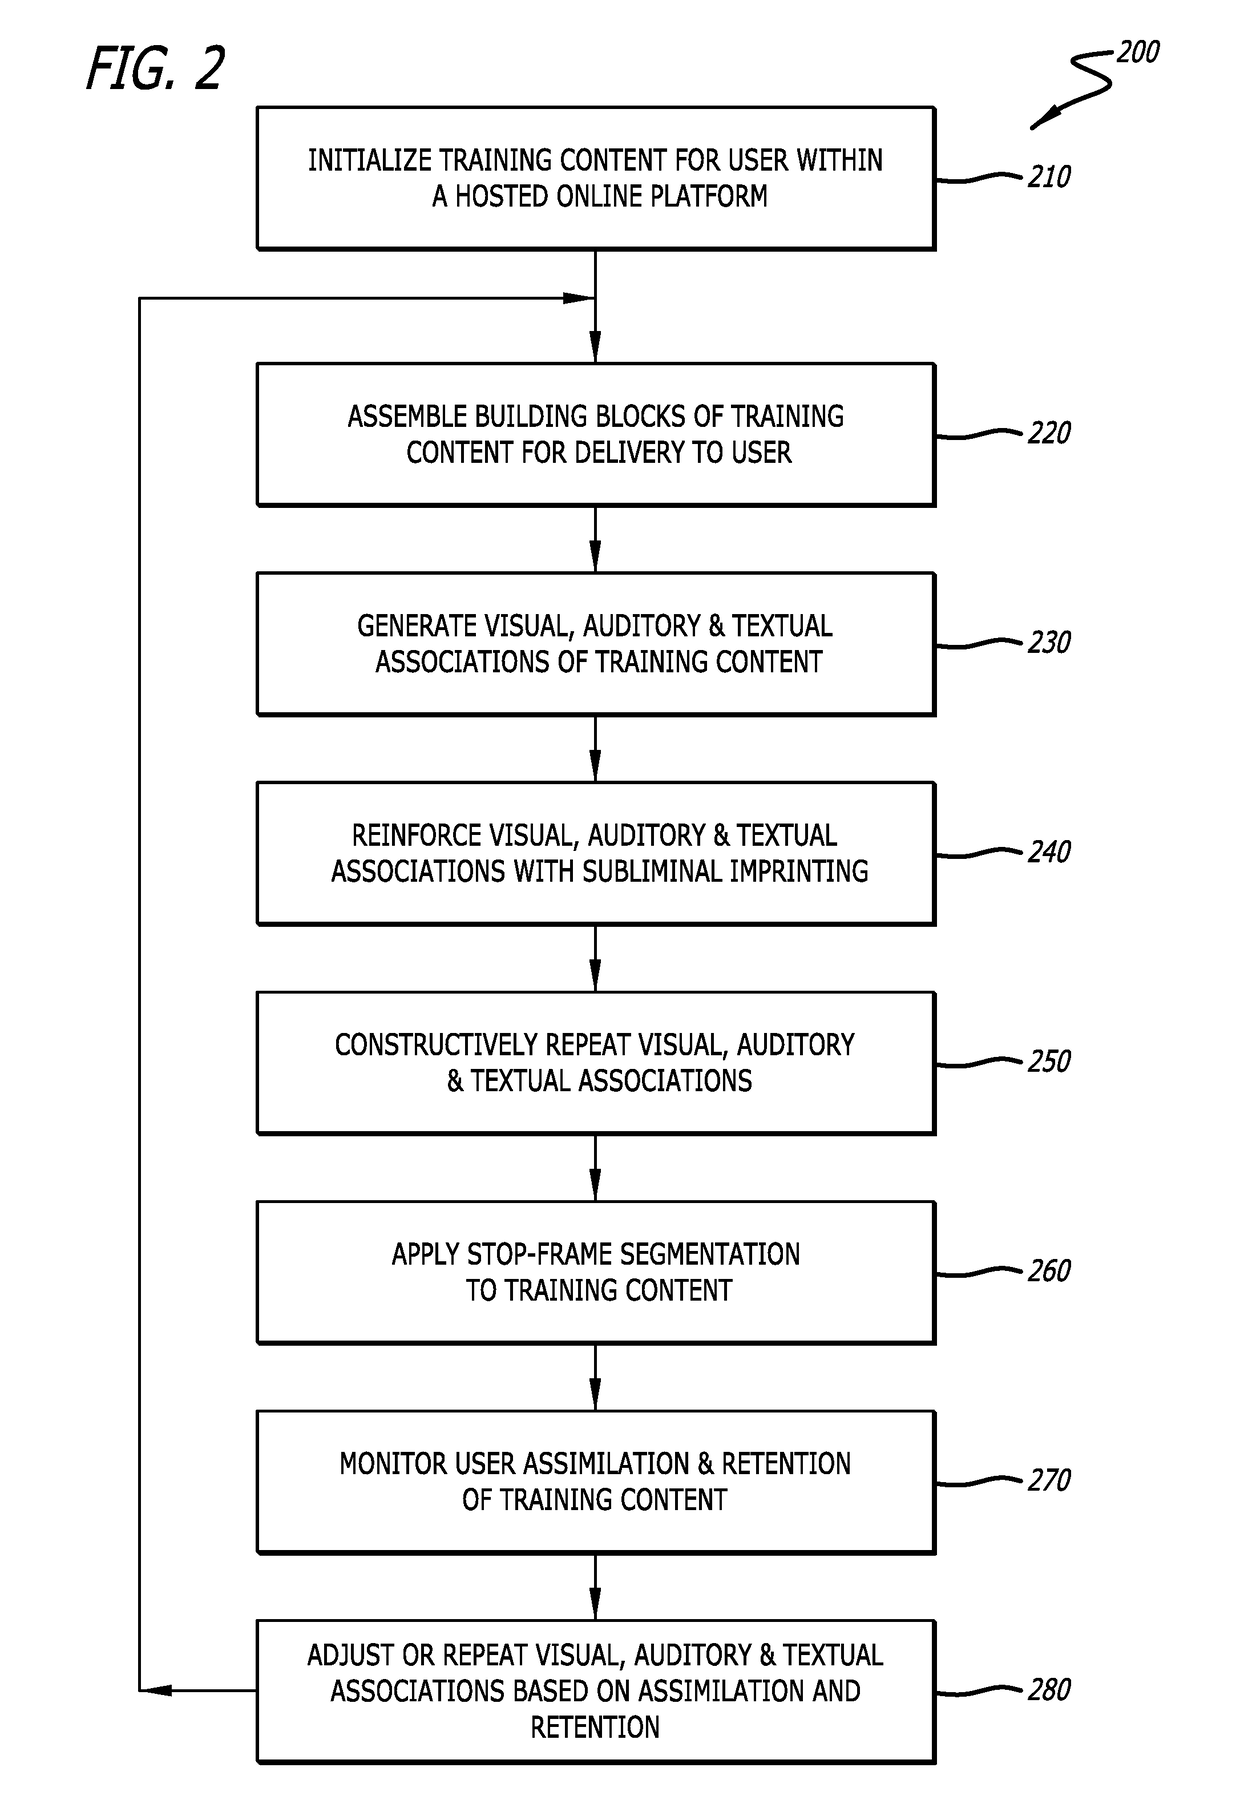 Cognitive assimilation and situational recognition training system and method